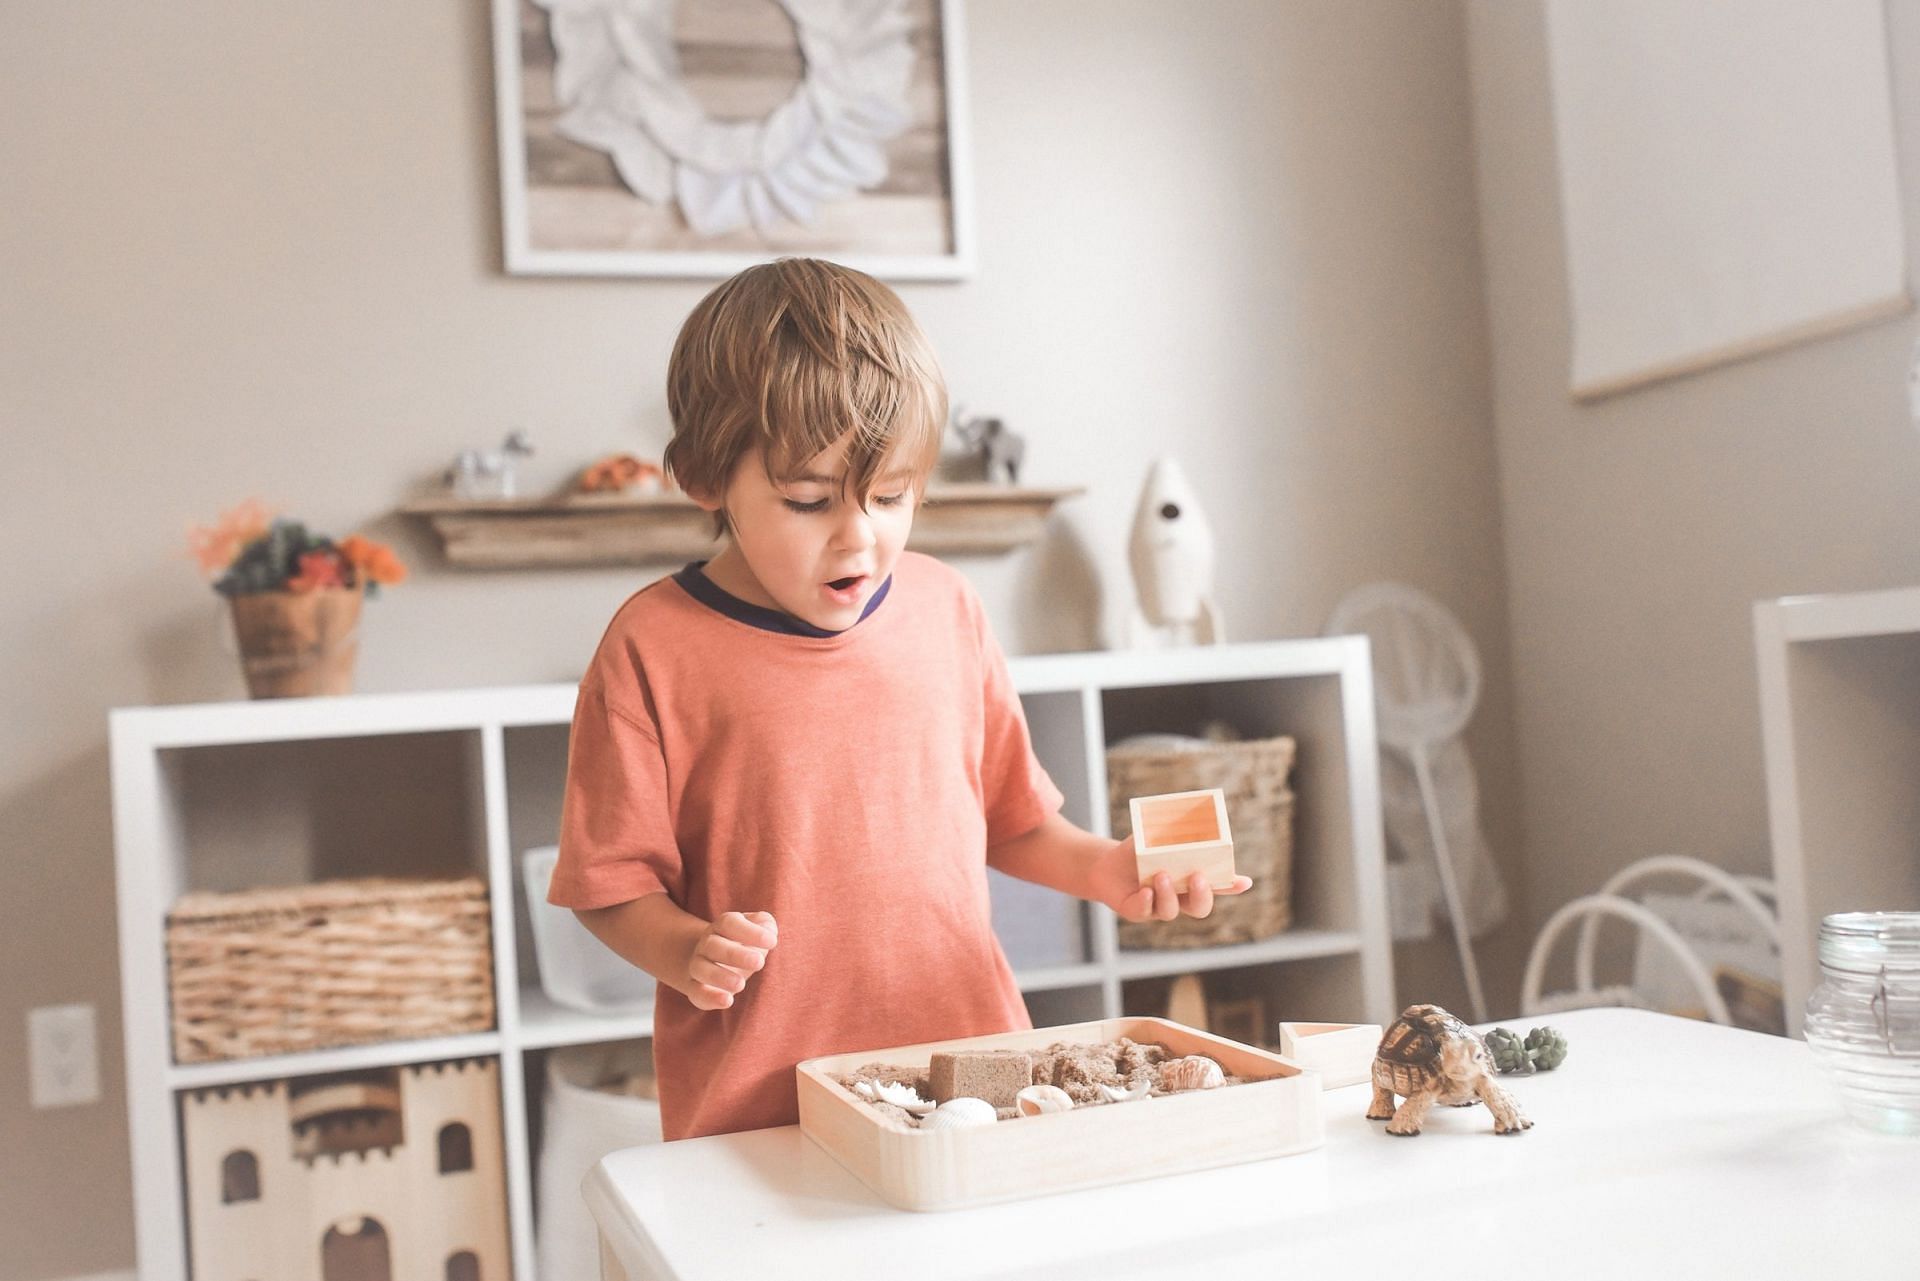 Home remedies for cough in a toddler (Image via Unsplash/Paige Cody)